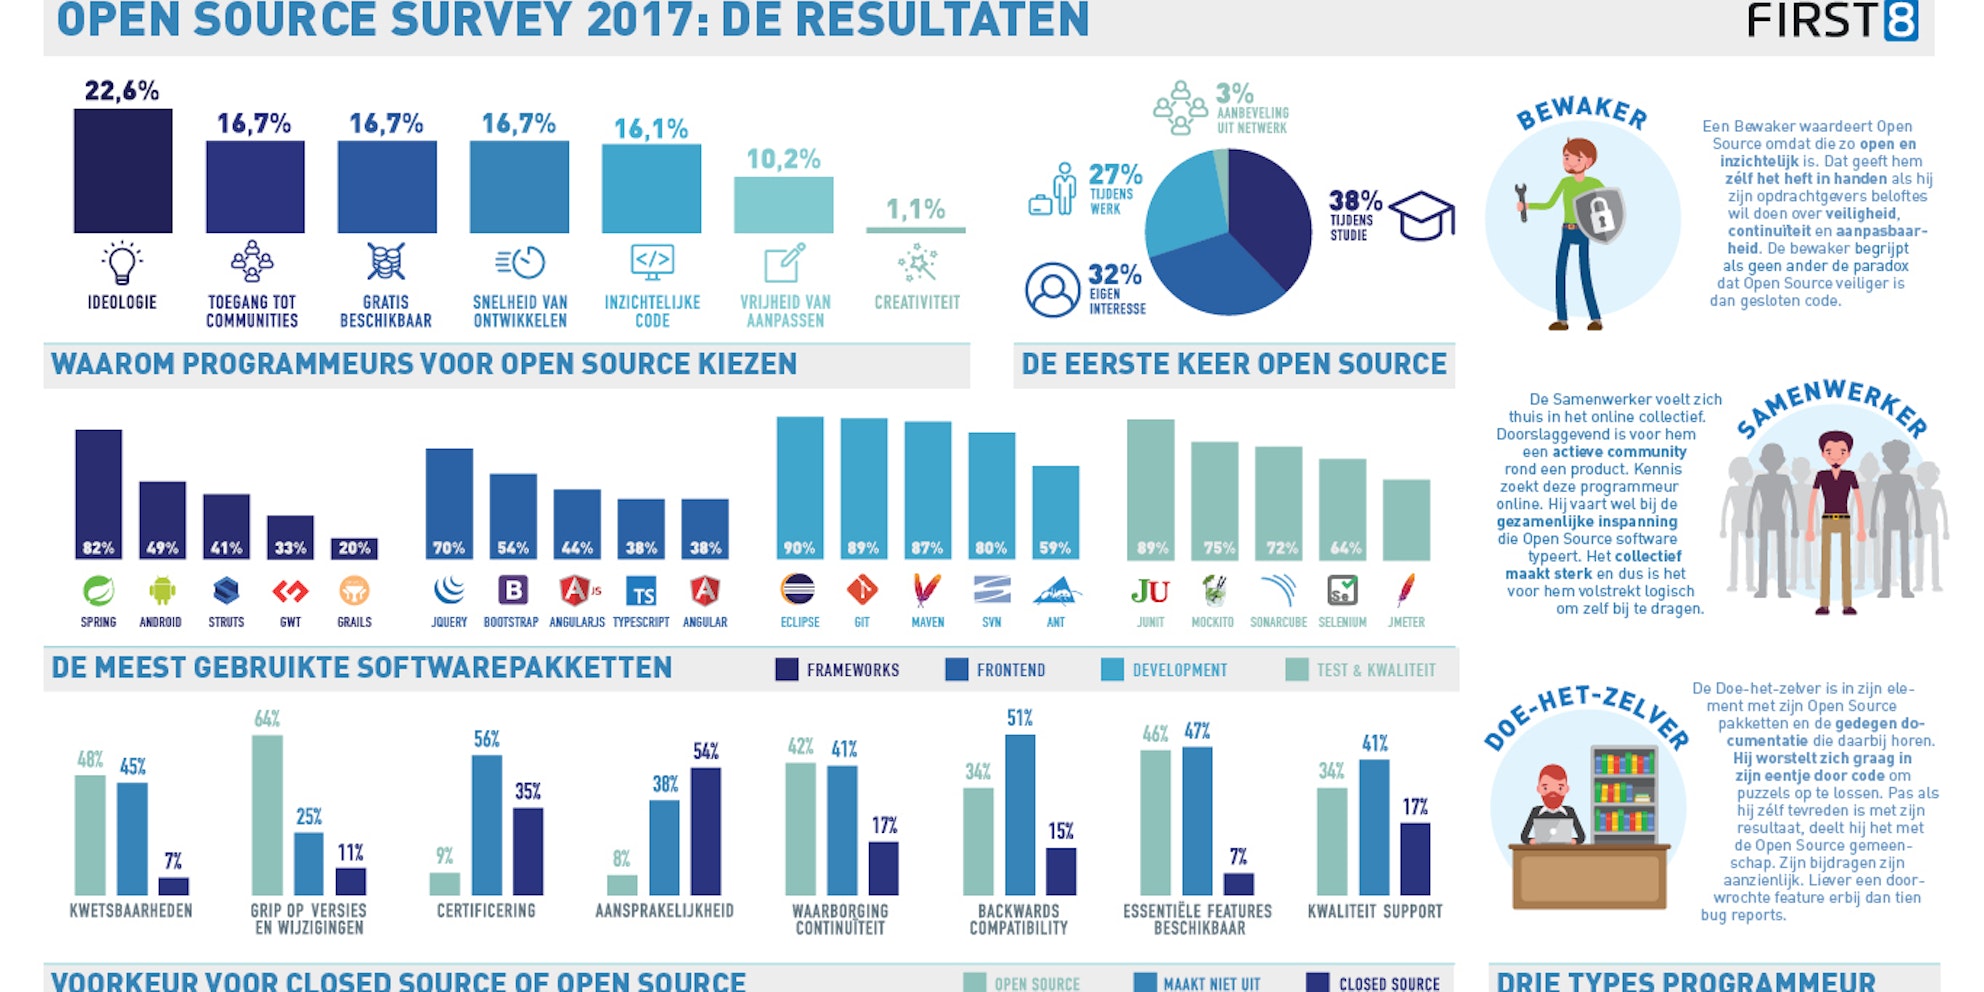 First8 Open Source Survey 2017 infographic